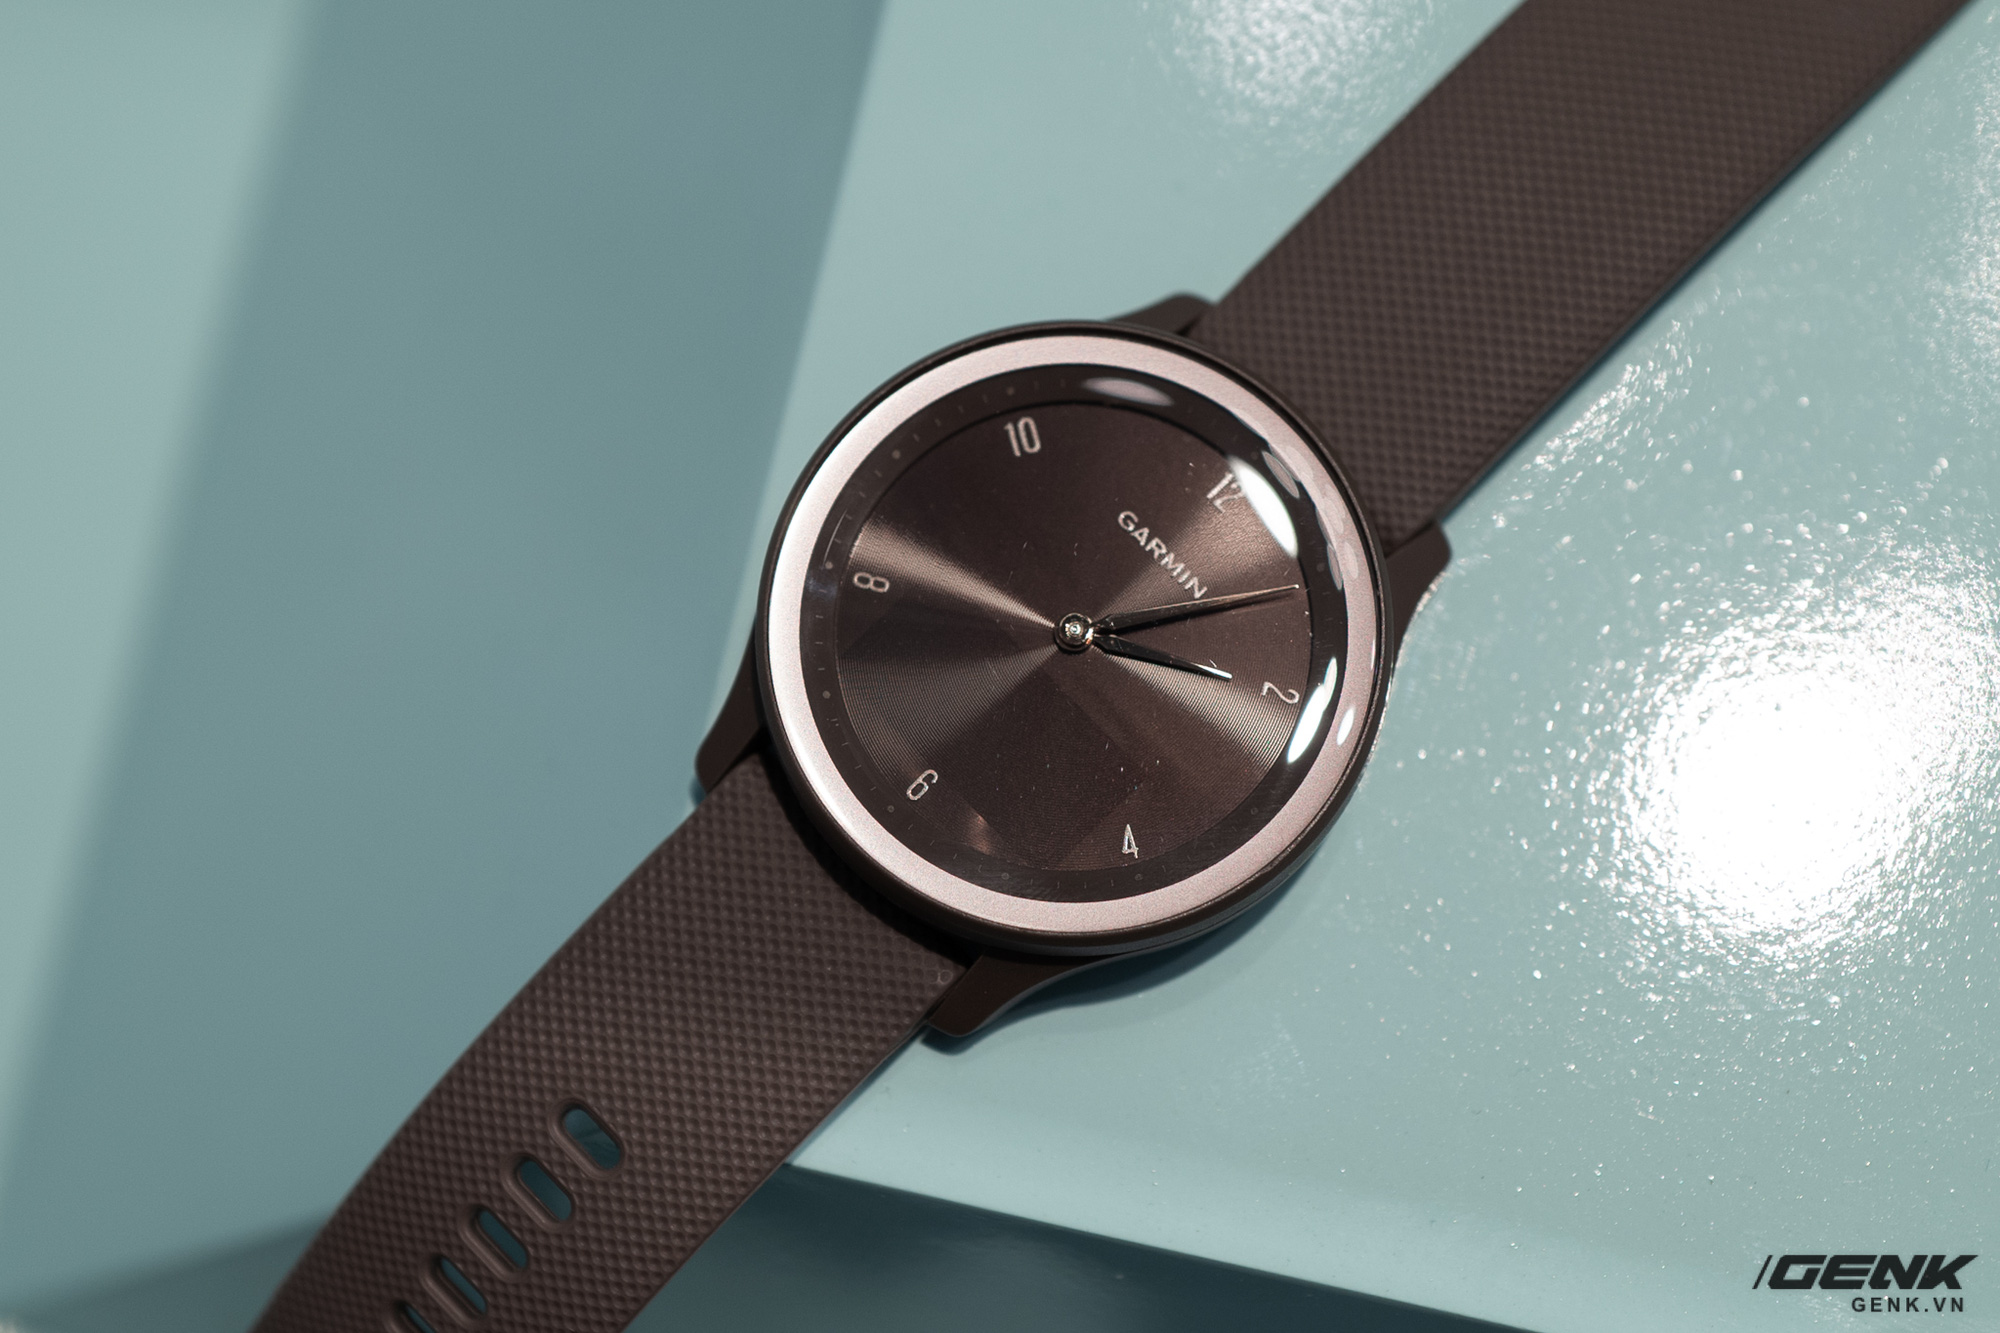 Garmin launched the watch Hybrid vivomove Sport: classic analog combined with modern touch, priced from 4.5 million VND - Photo 13.